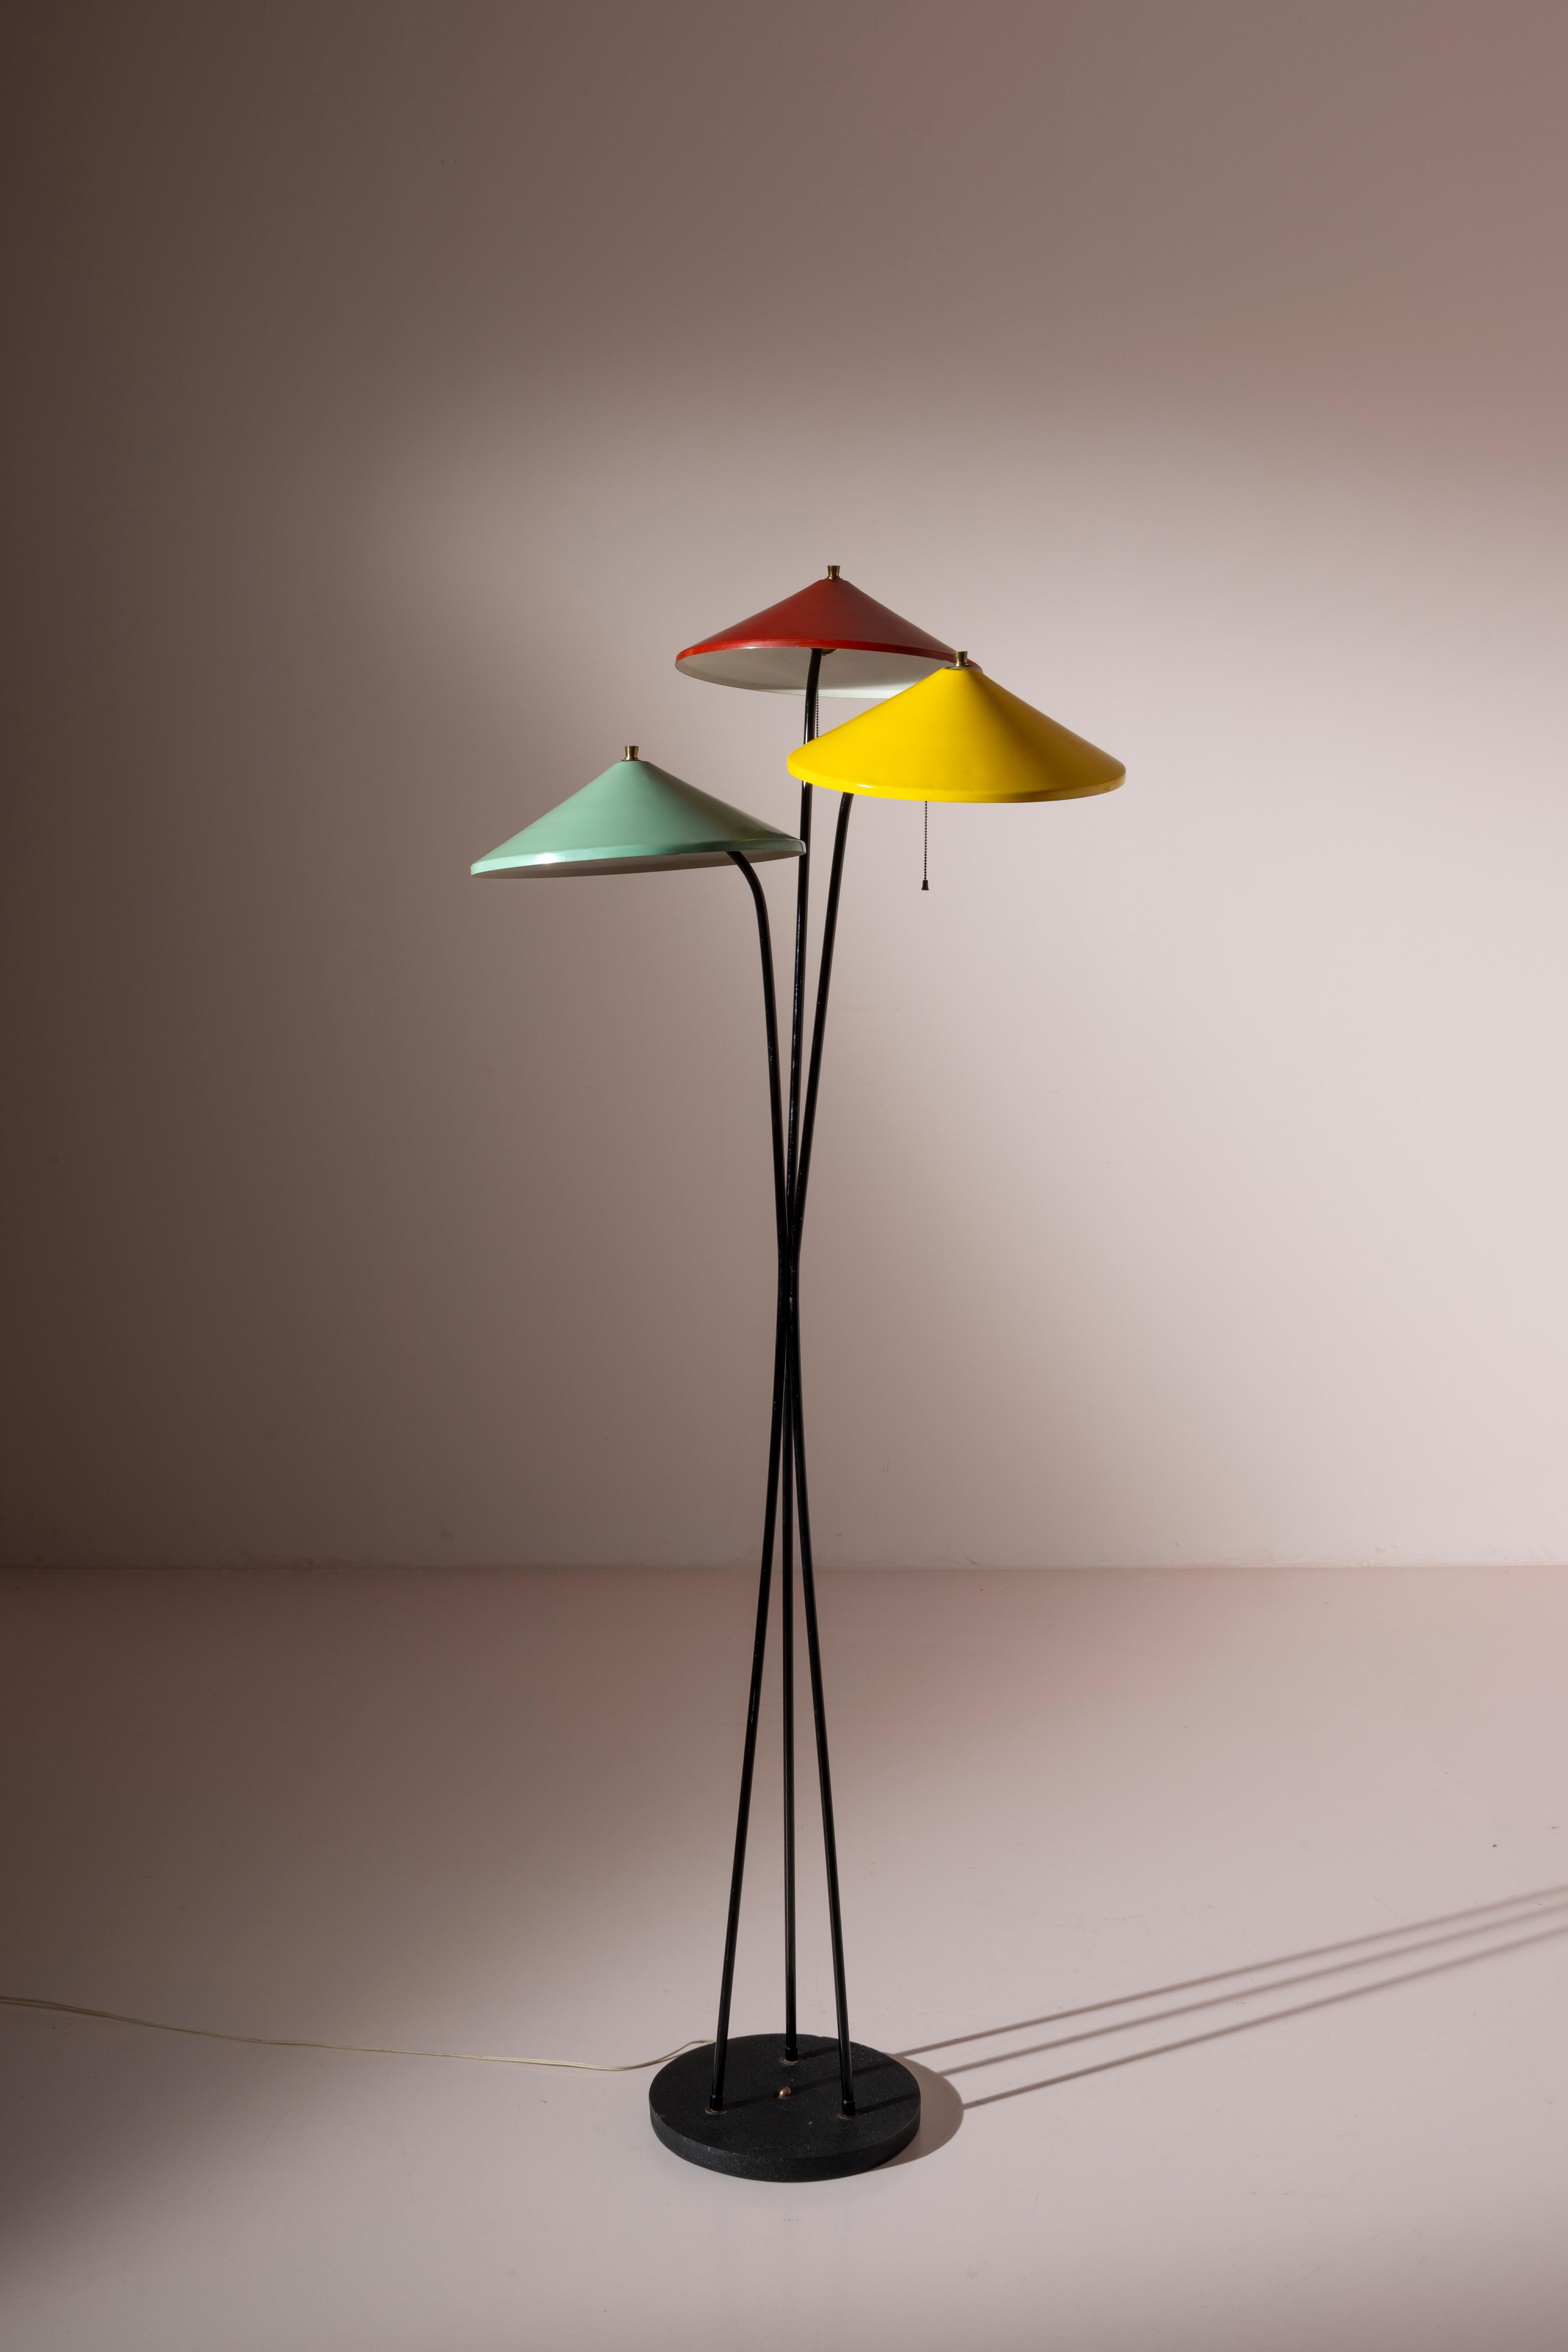 Floor lamp in metal with colored lampshades, from the 1950s, Italian craftsmanship, produced by Stilnovo.

A playful floor lamp in painted metal with the typical 1950s silhouette. Three slender stems rise from a perfectly round iron base,